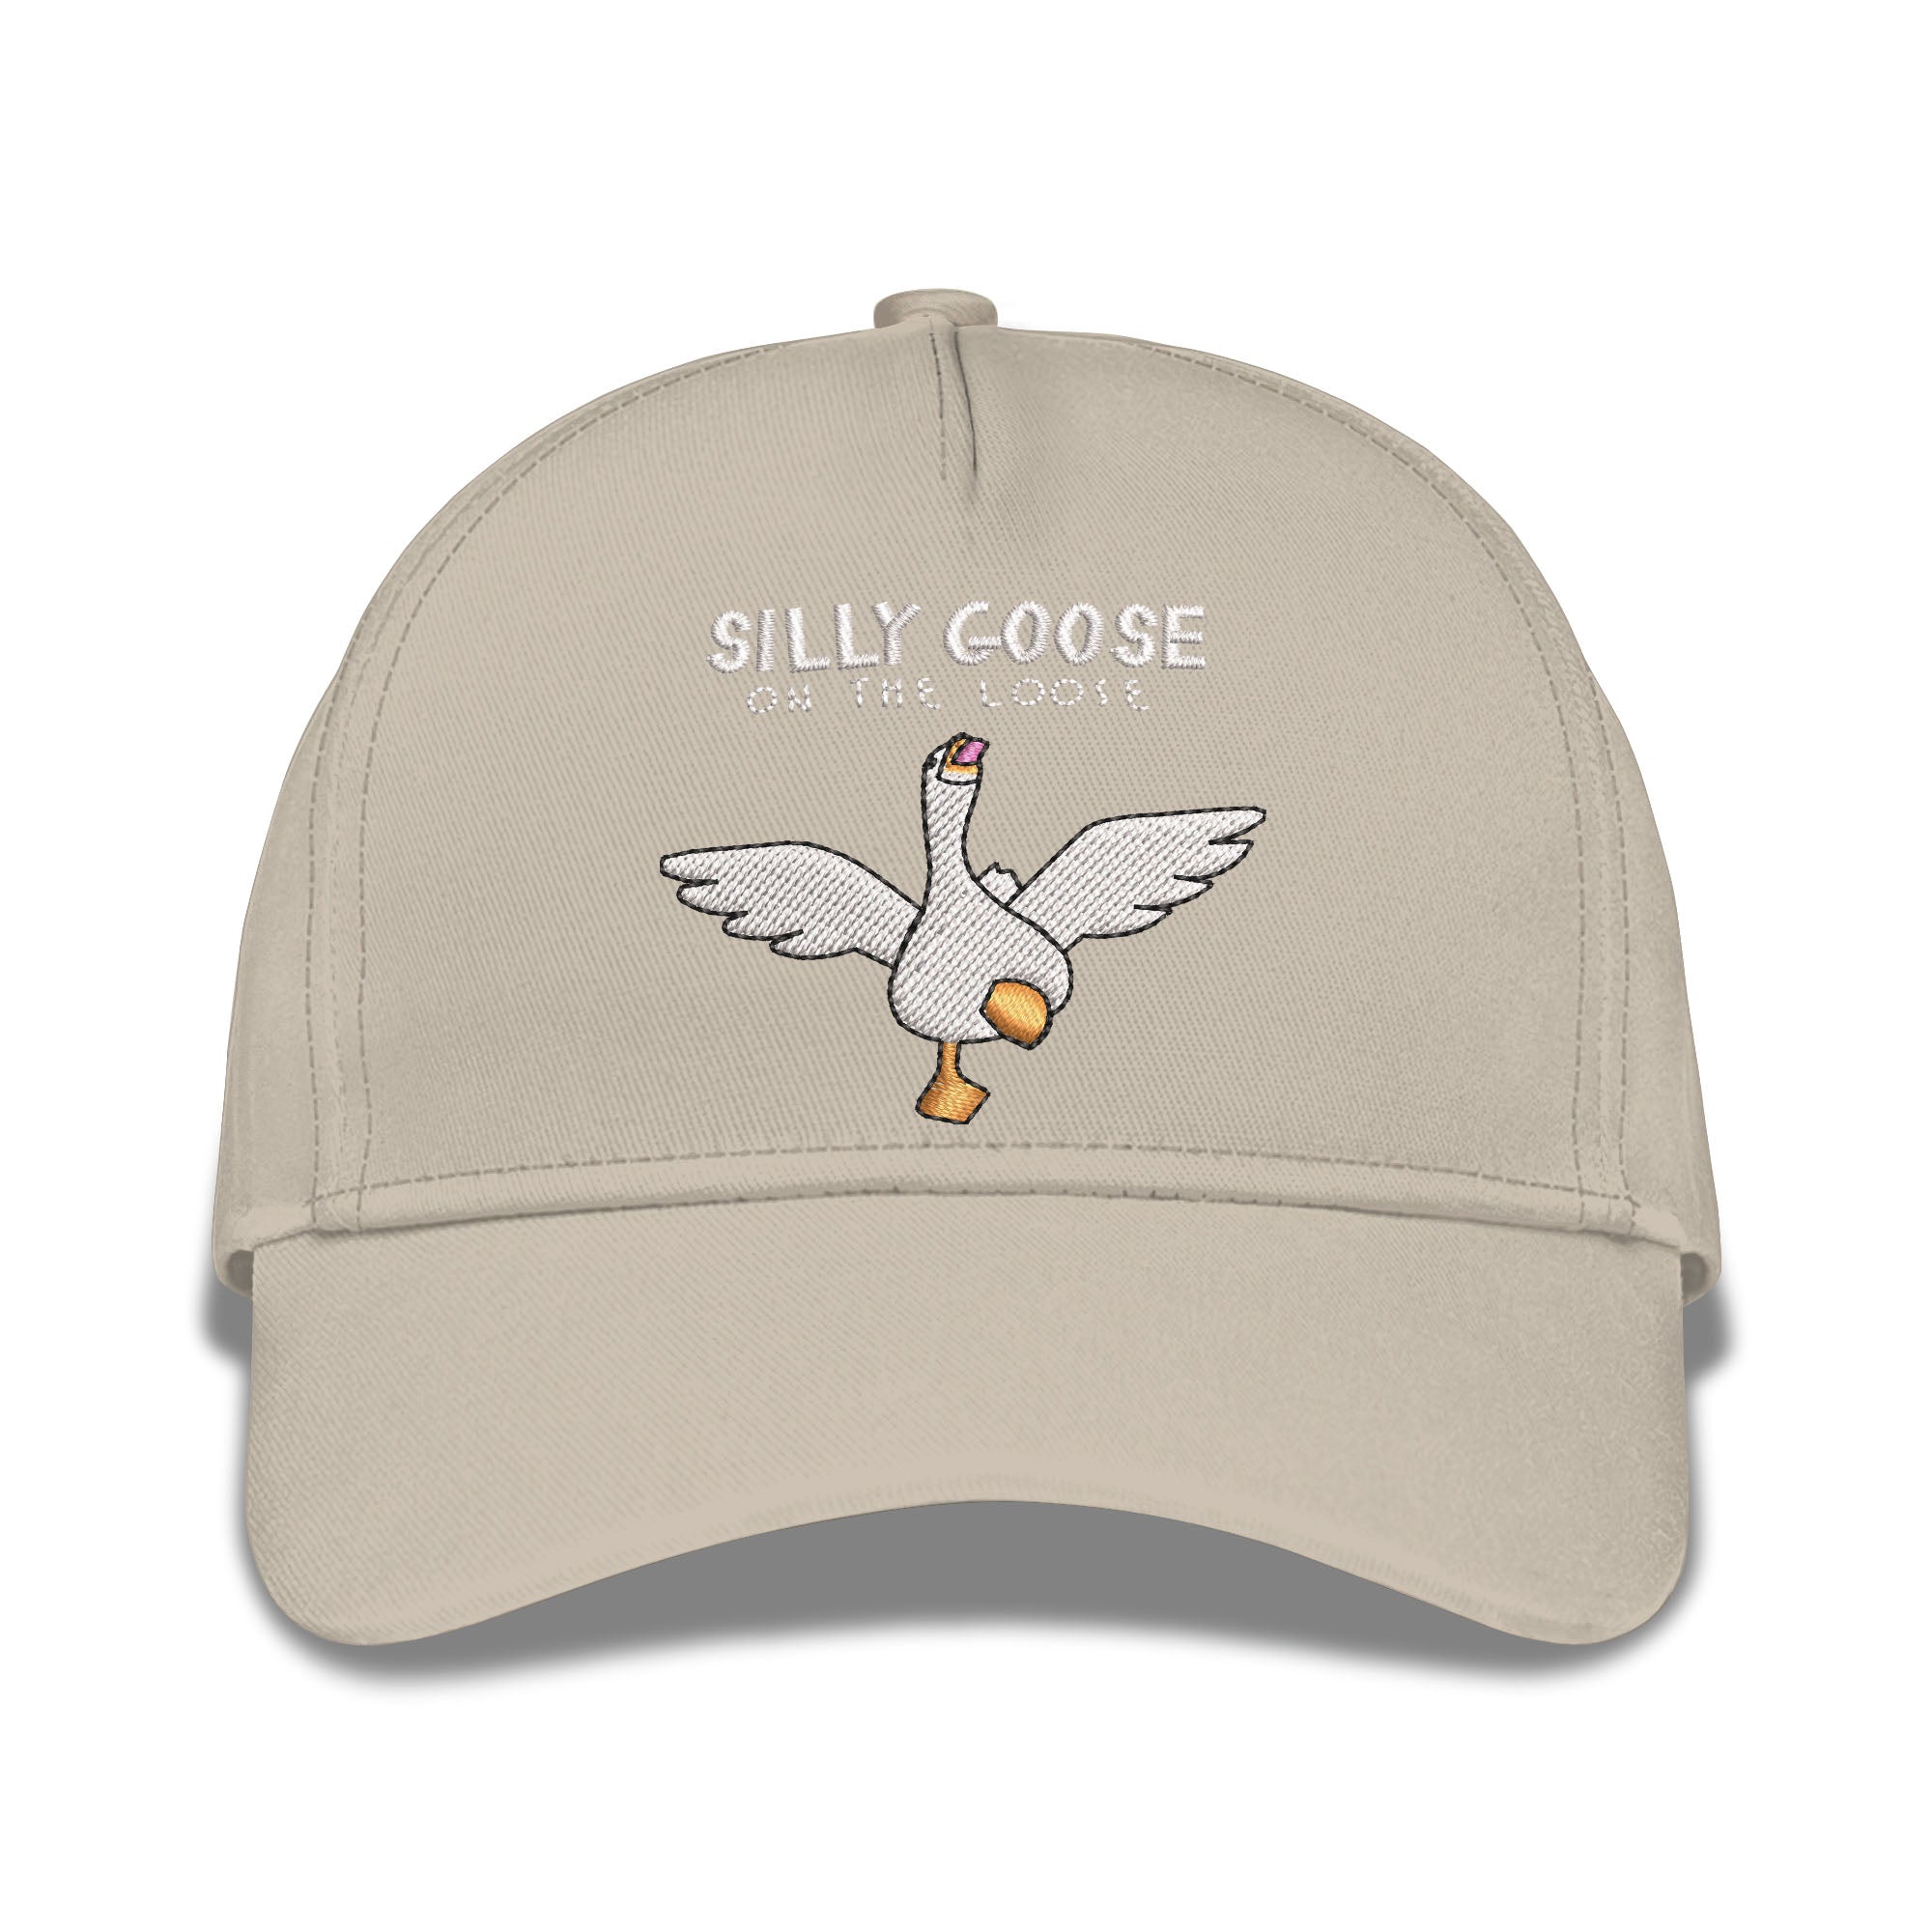 Silly Goose On The Loose Embroidered Baseball Caps